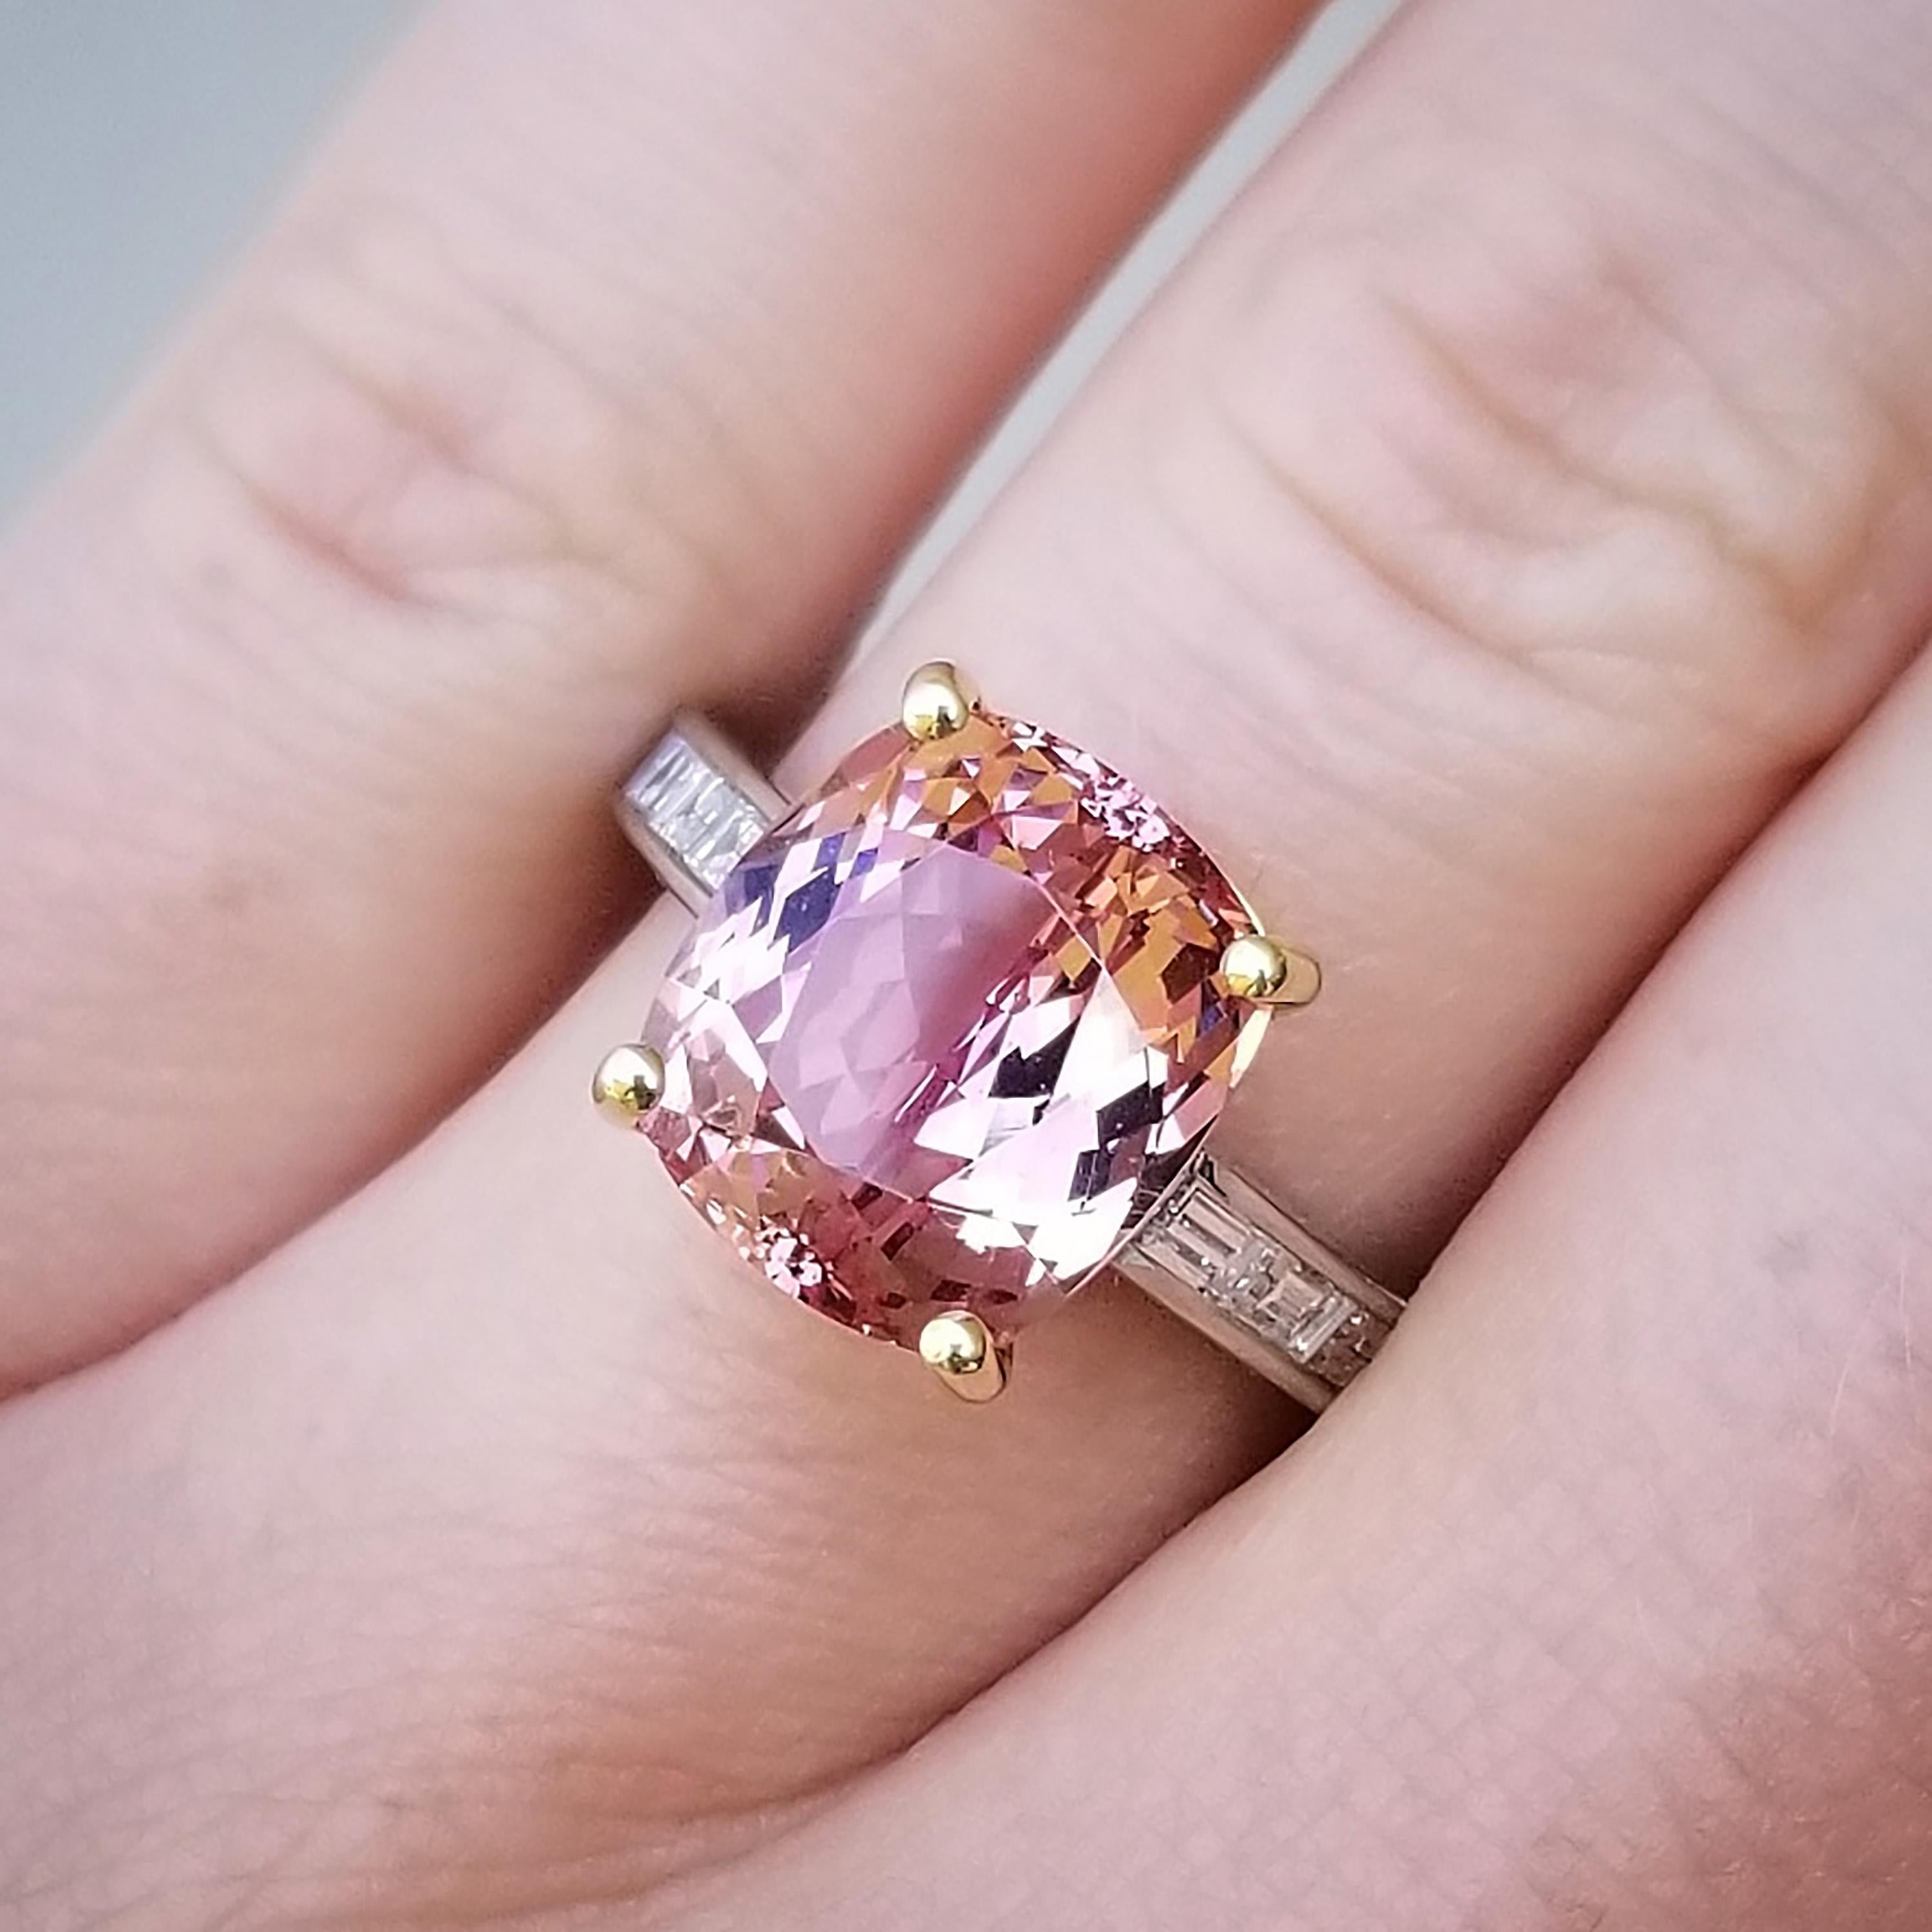 This gorgeous Mahenge Garnet features a peachy-pink color with violet tones and red flash; it's a unique color I've never seen in another gem. Because it’s a well-cut Mahenge garnet, the flash and sparkle of this stone are outrageous. This is a look